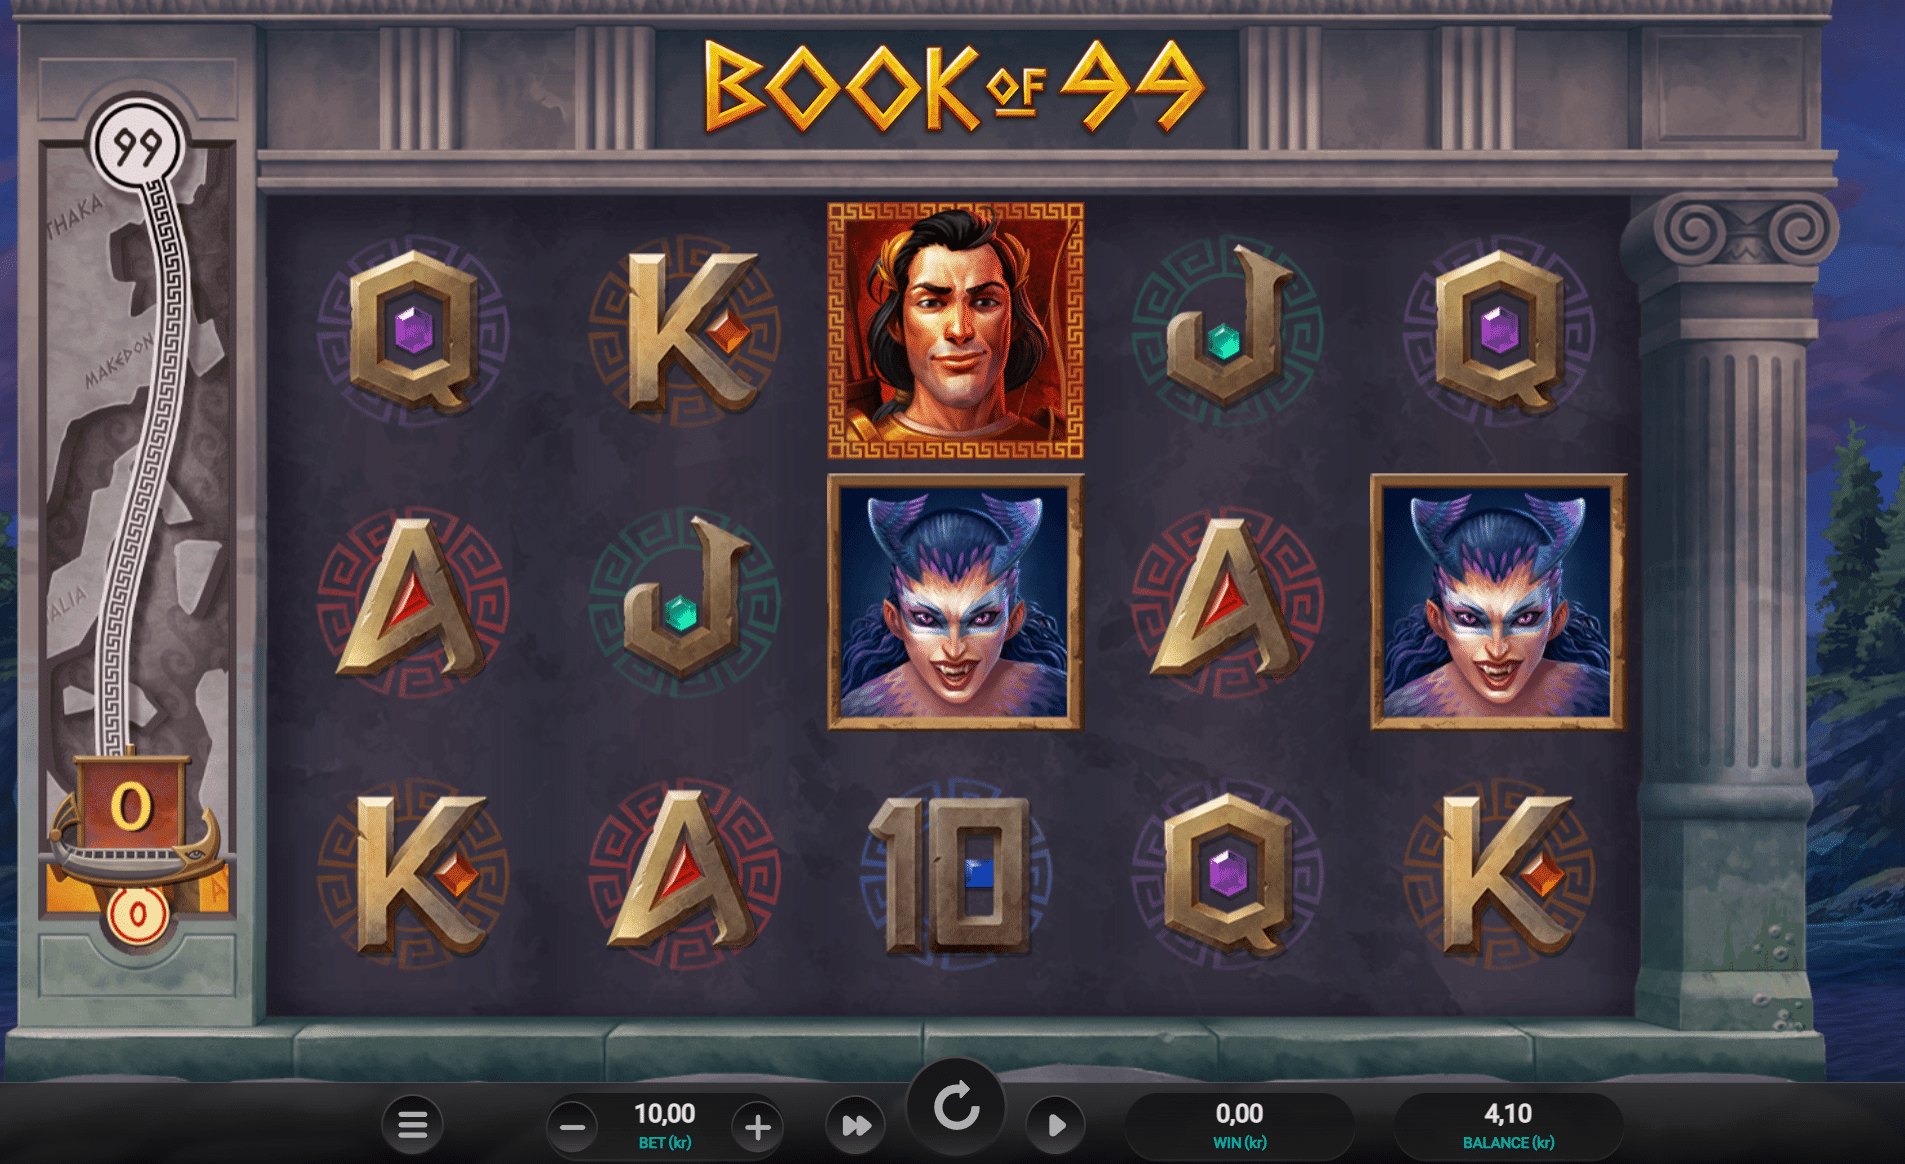 Review of Book of 99, writed by ValueGambling. Great slot!